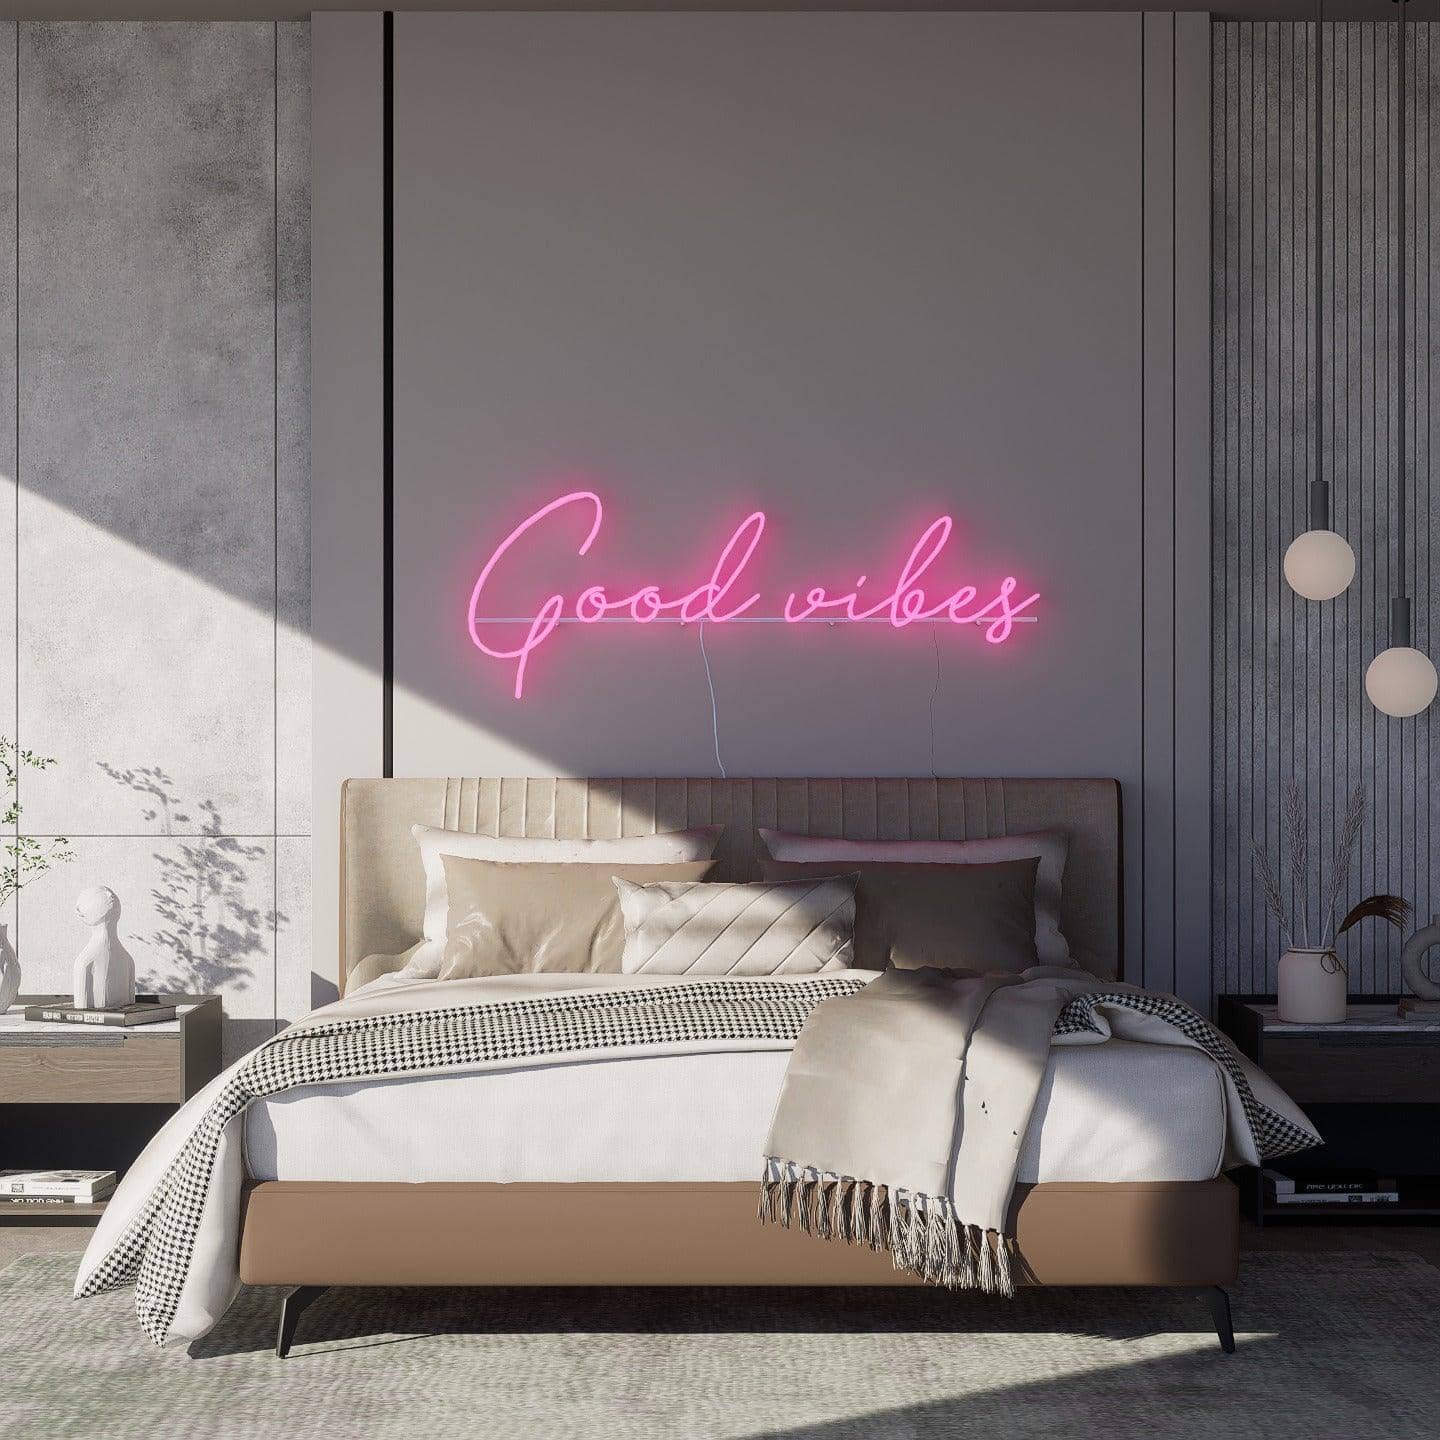 light-up-pink-neon-lights-during-the-day-and-hang-on-the-wall-for-display-good-vibes